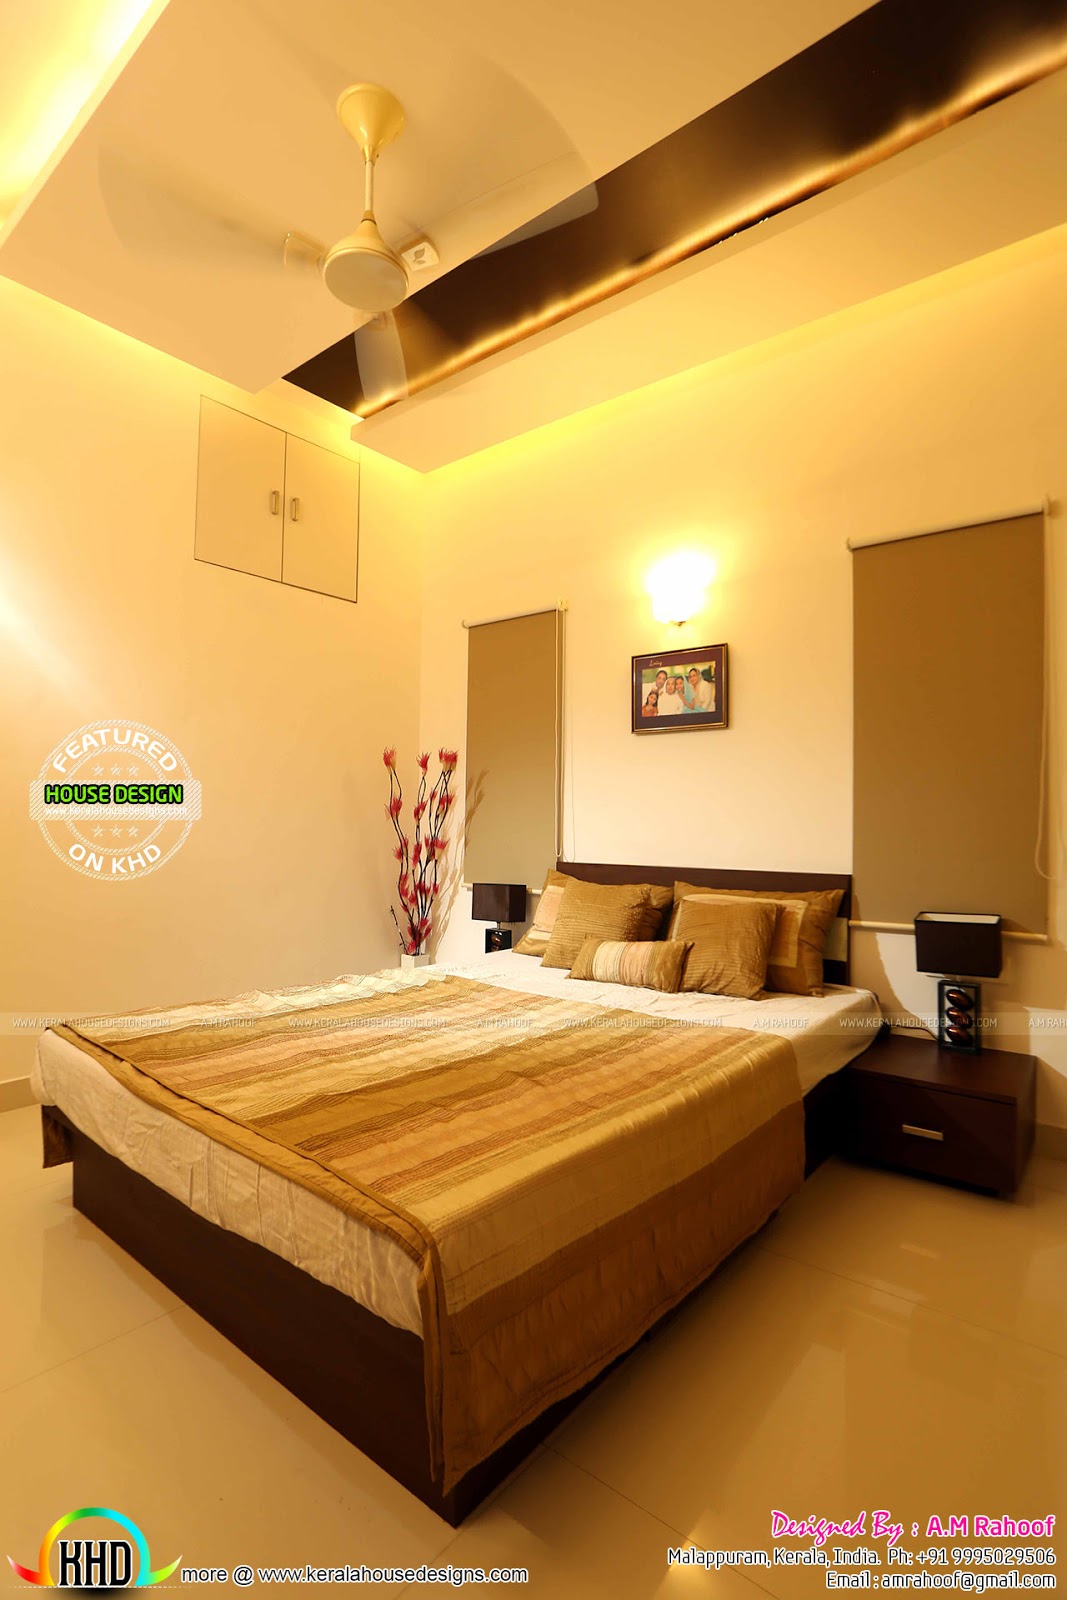 Work finished, furnished house with interiors - Kerala ...